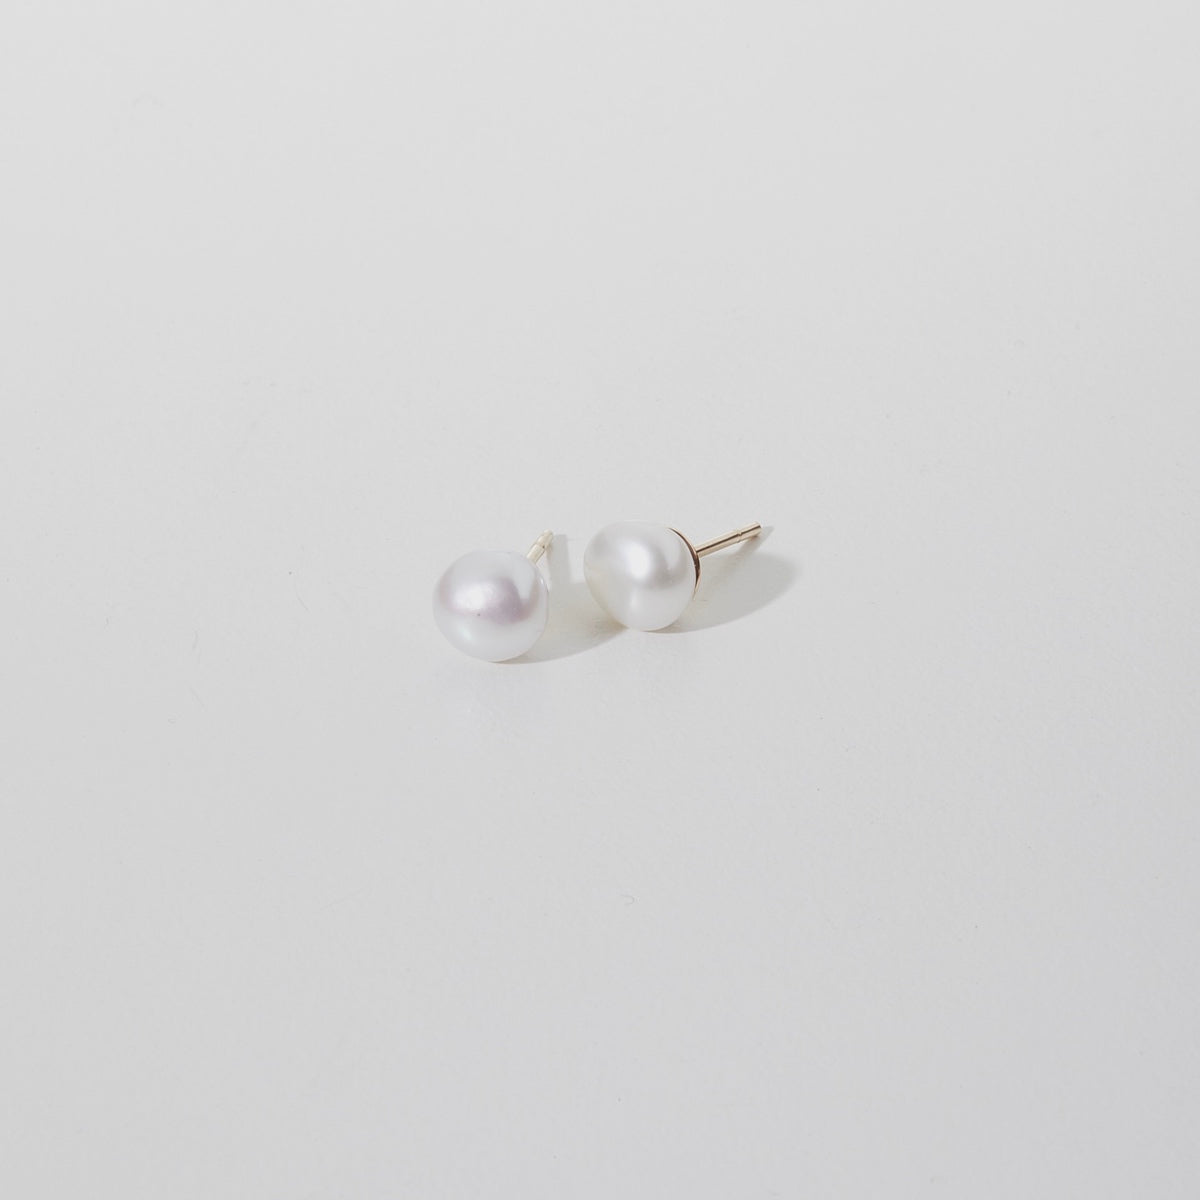 Our high quality, hand finished Small Baroque Pearl Studs in 9ct yellow gold